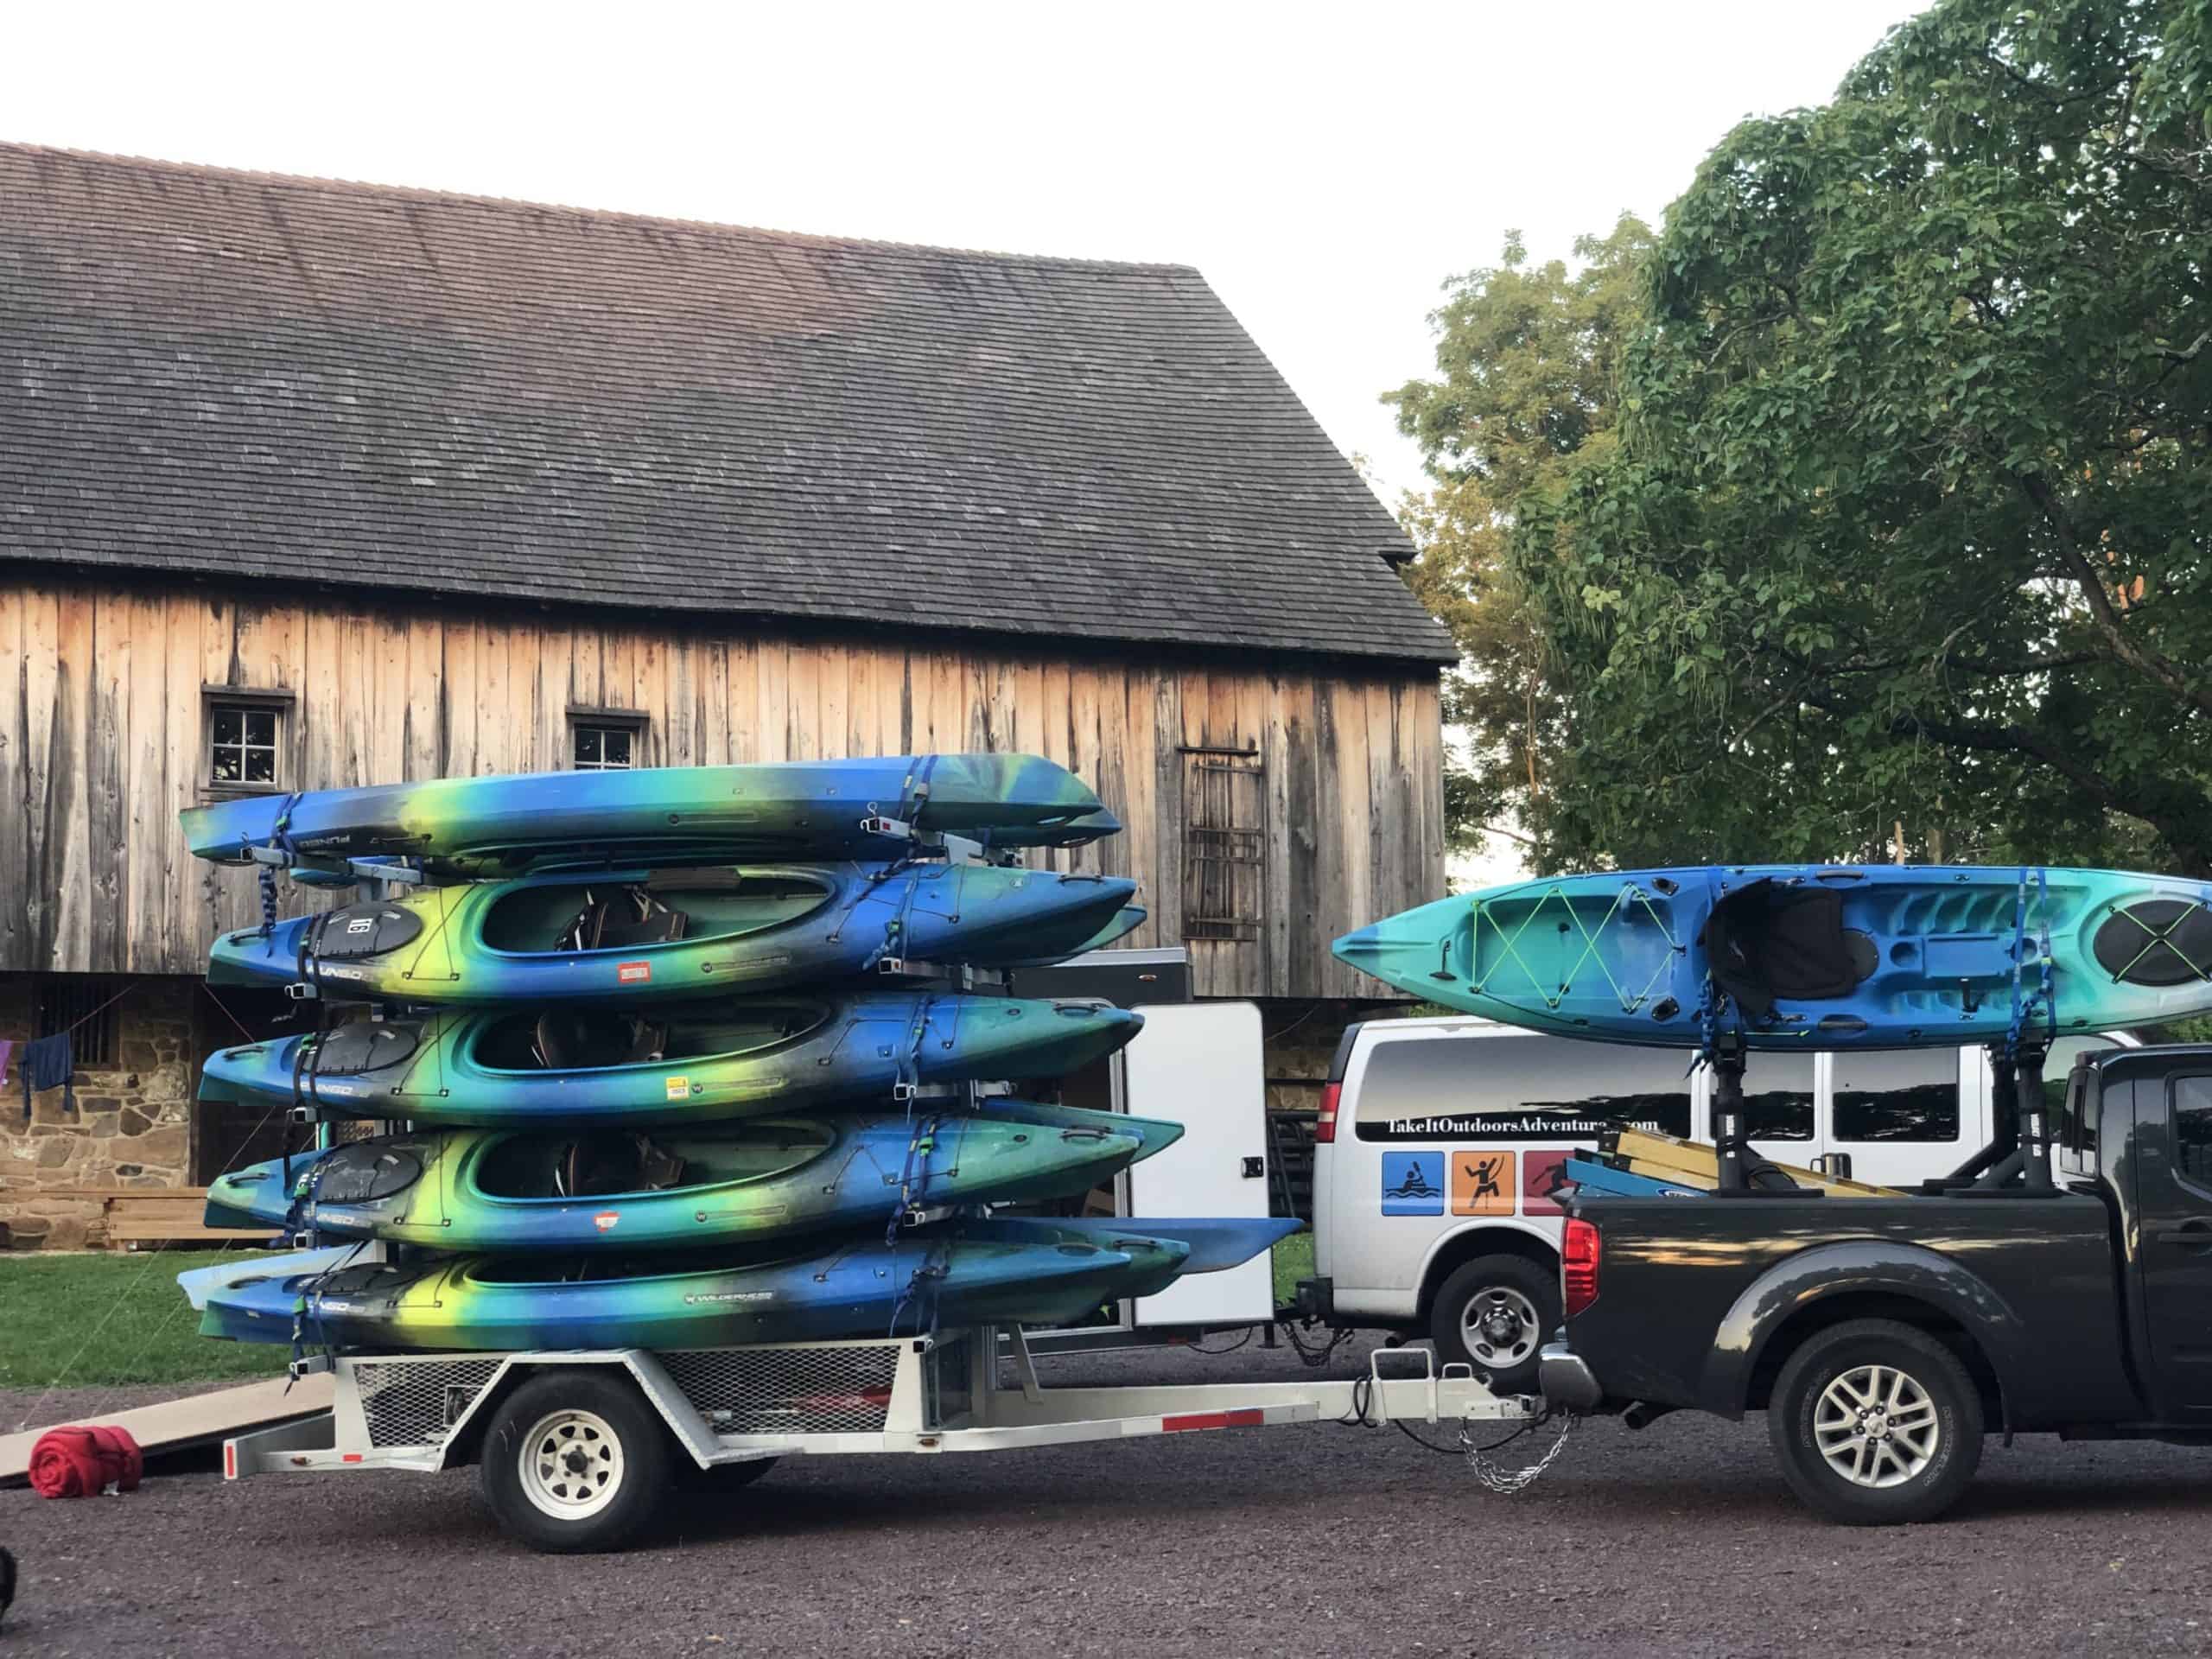 Kayaks stacked five high on a trailer ready for the Schuylkill River